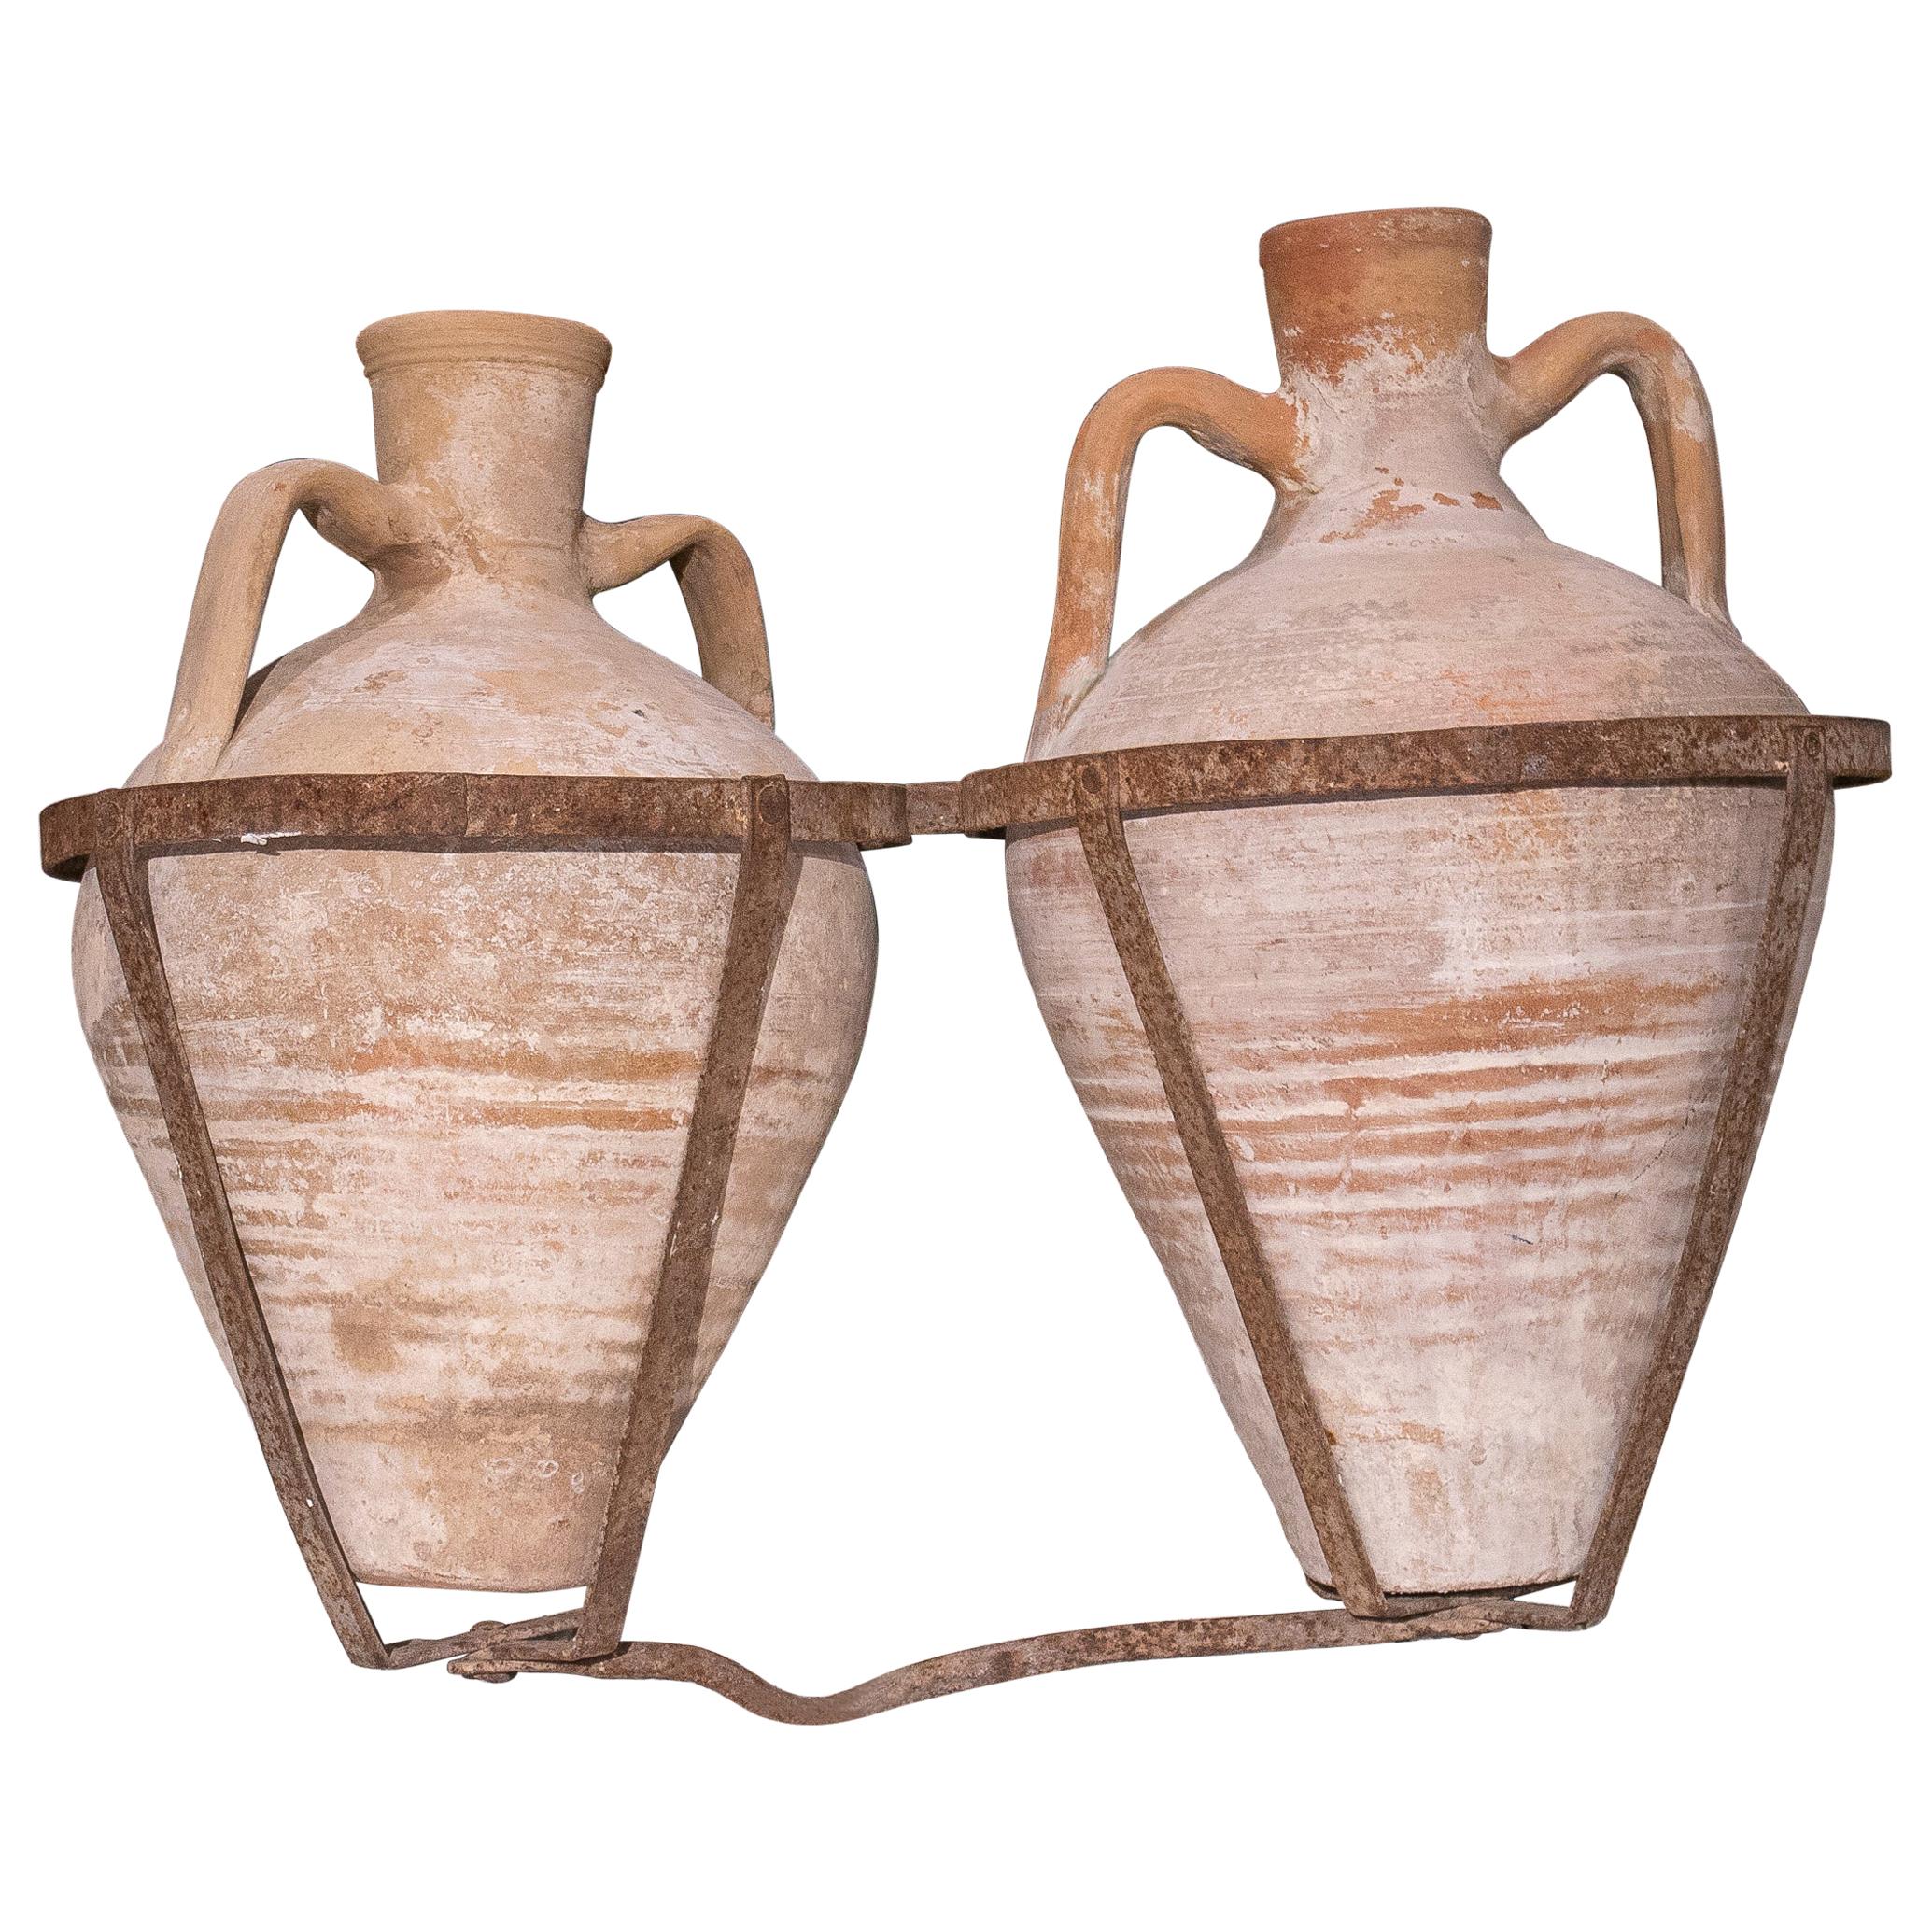 Pair of 1930s Spanish Terracotta Vases w/ Iron Basket to be Carried by Mules